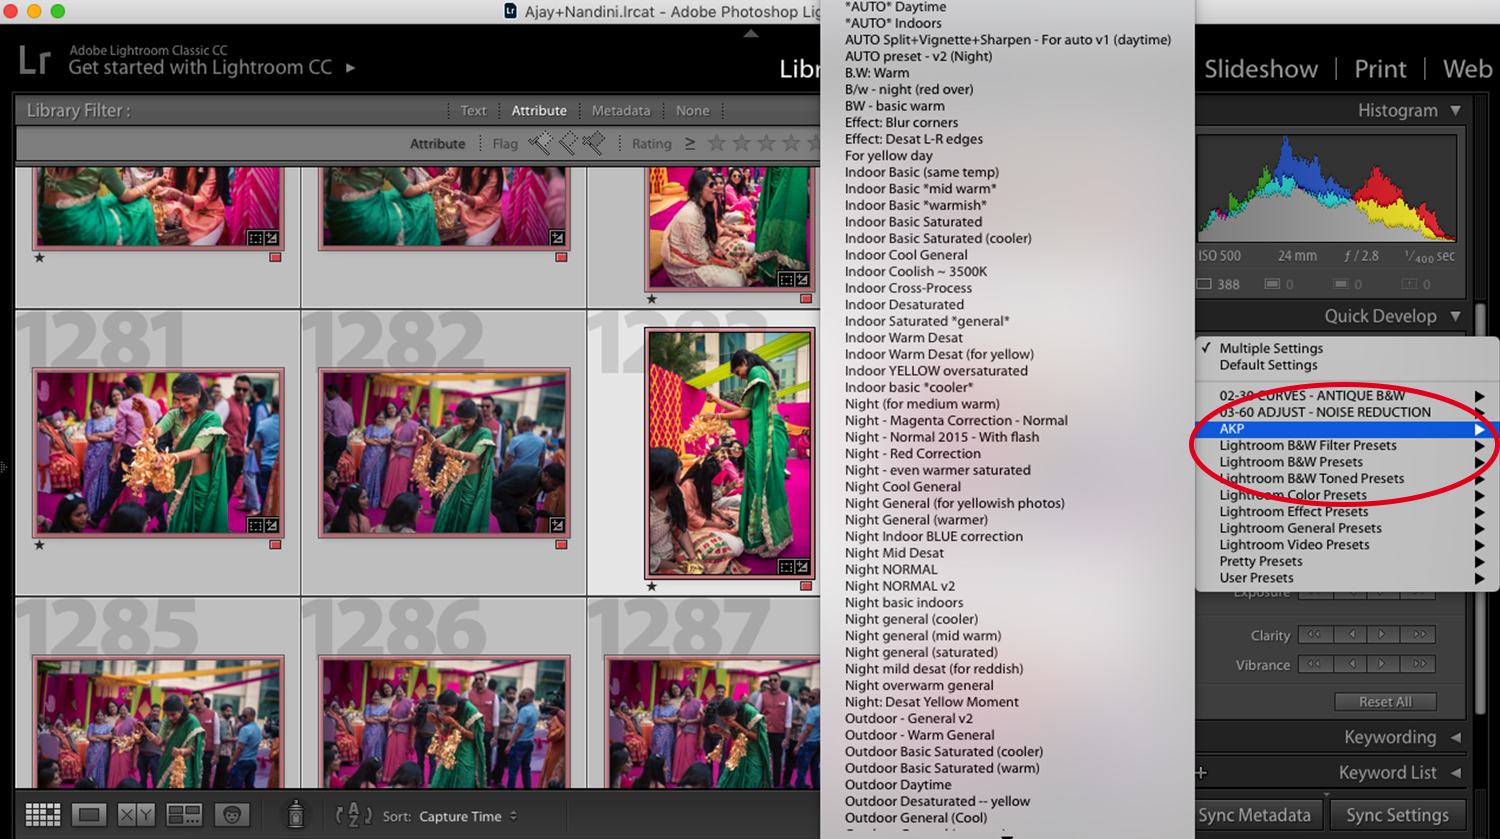 A screenshot of our Lightroom catalogue showing our presets for images.